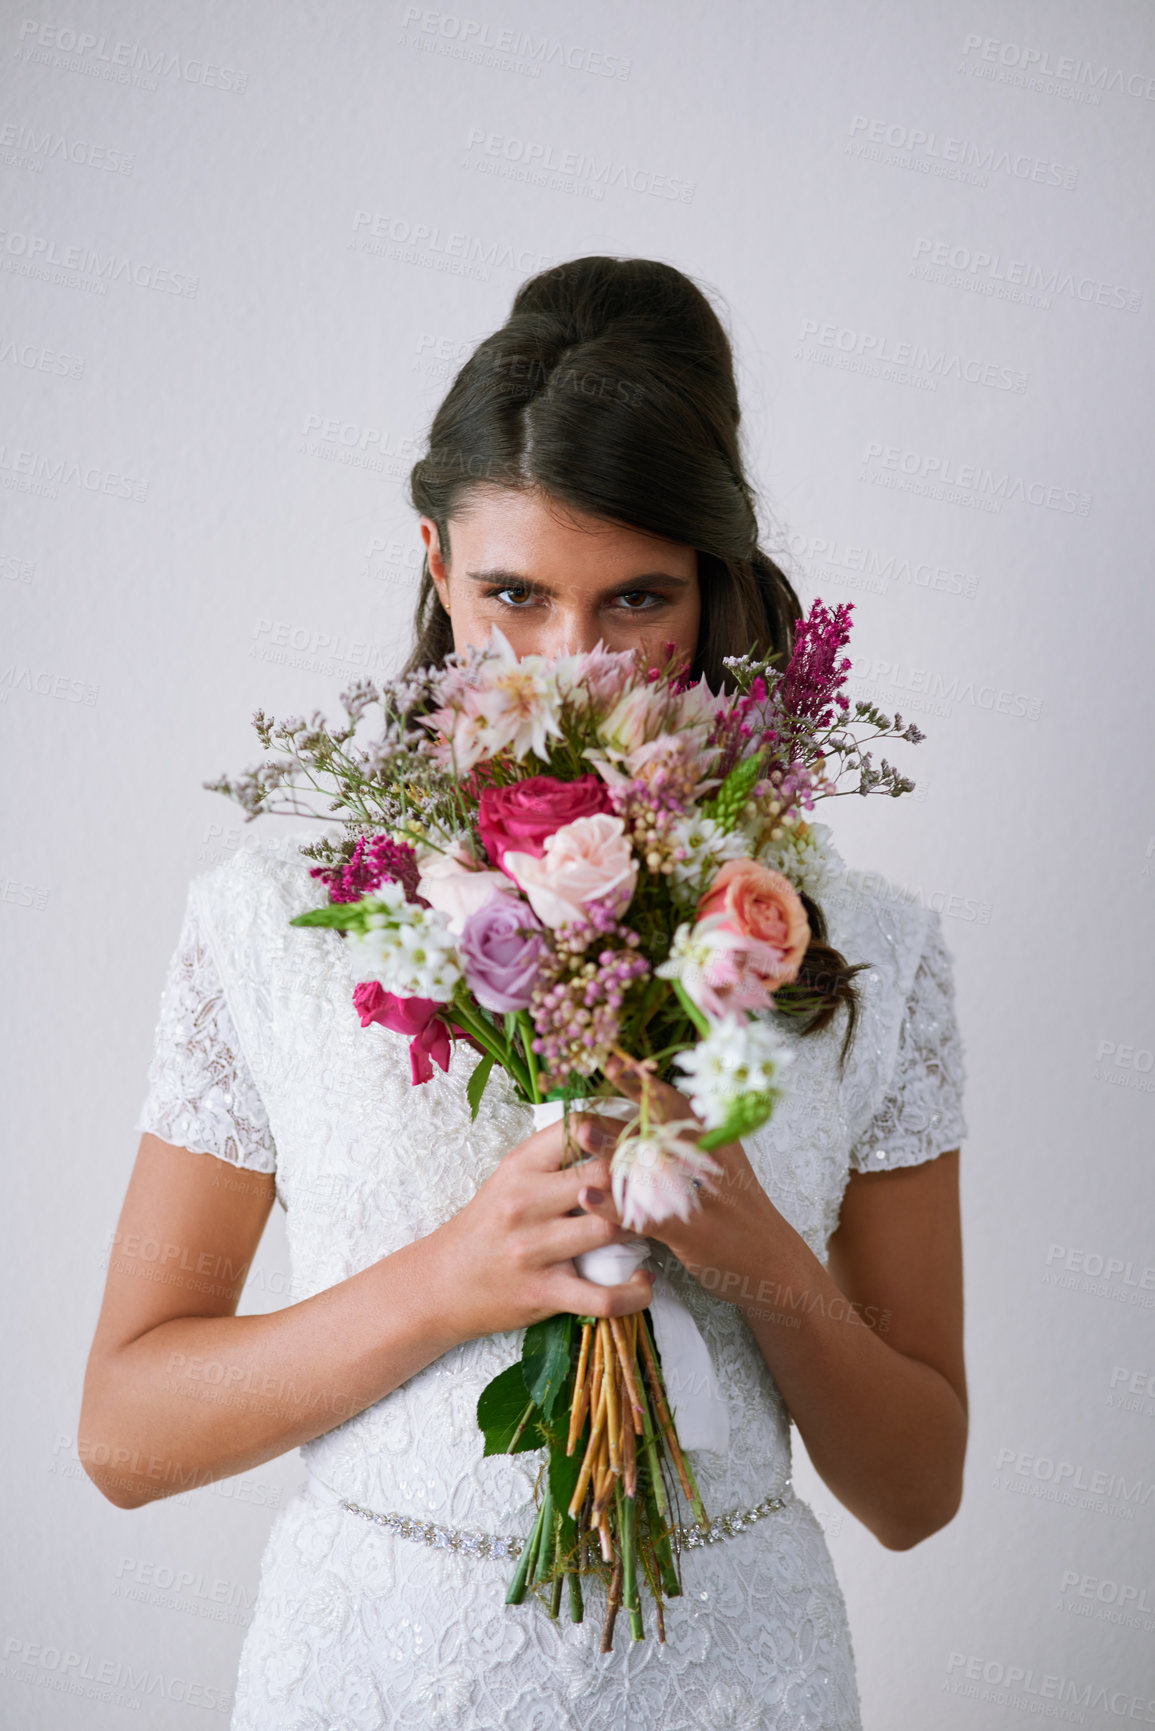 Buy stock photo Studio portrait of a young bride holding a bunch of flowers against a gray background